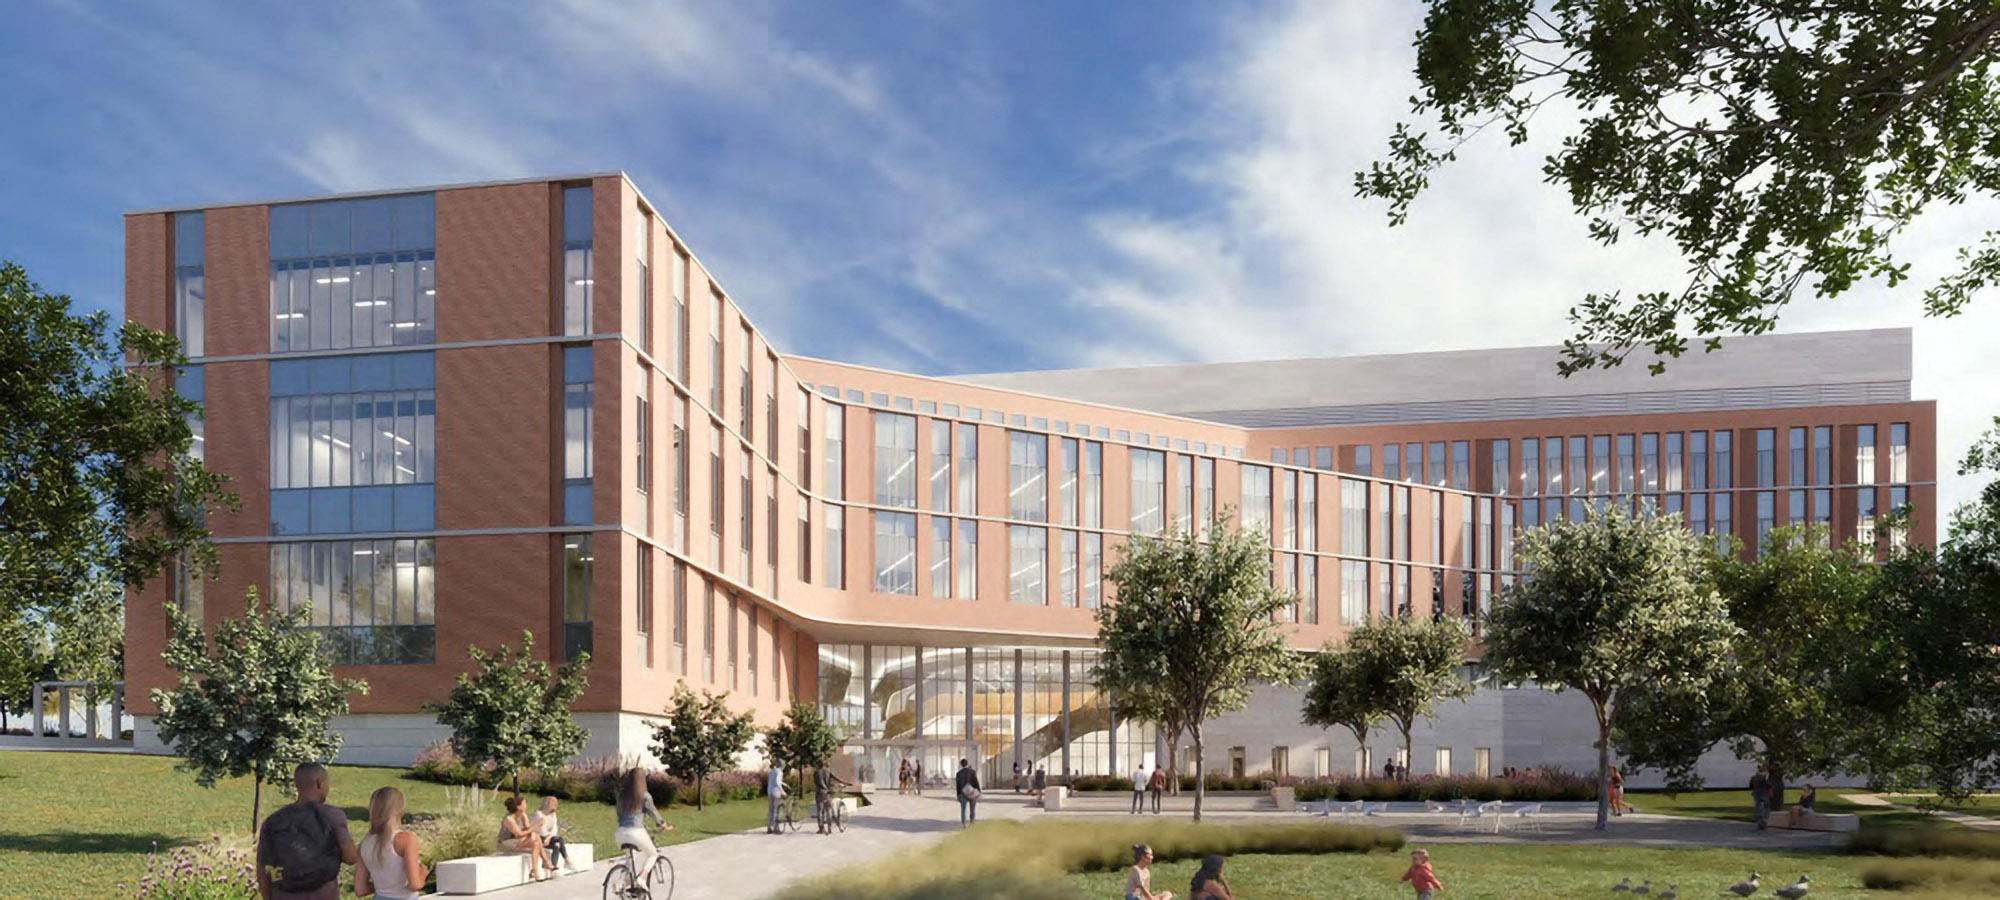 Rendering of the exterior of the new building for the Whiddon College of Medicine